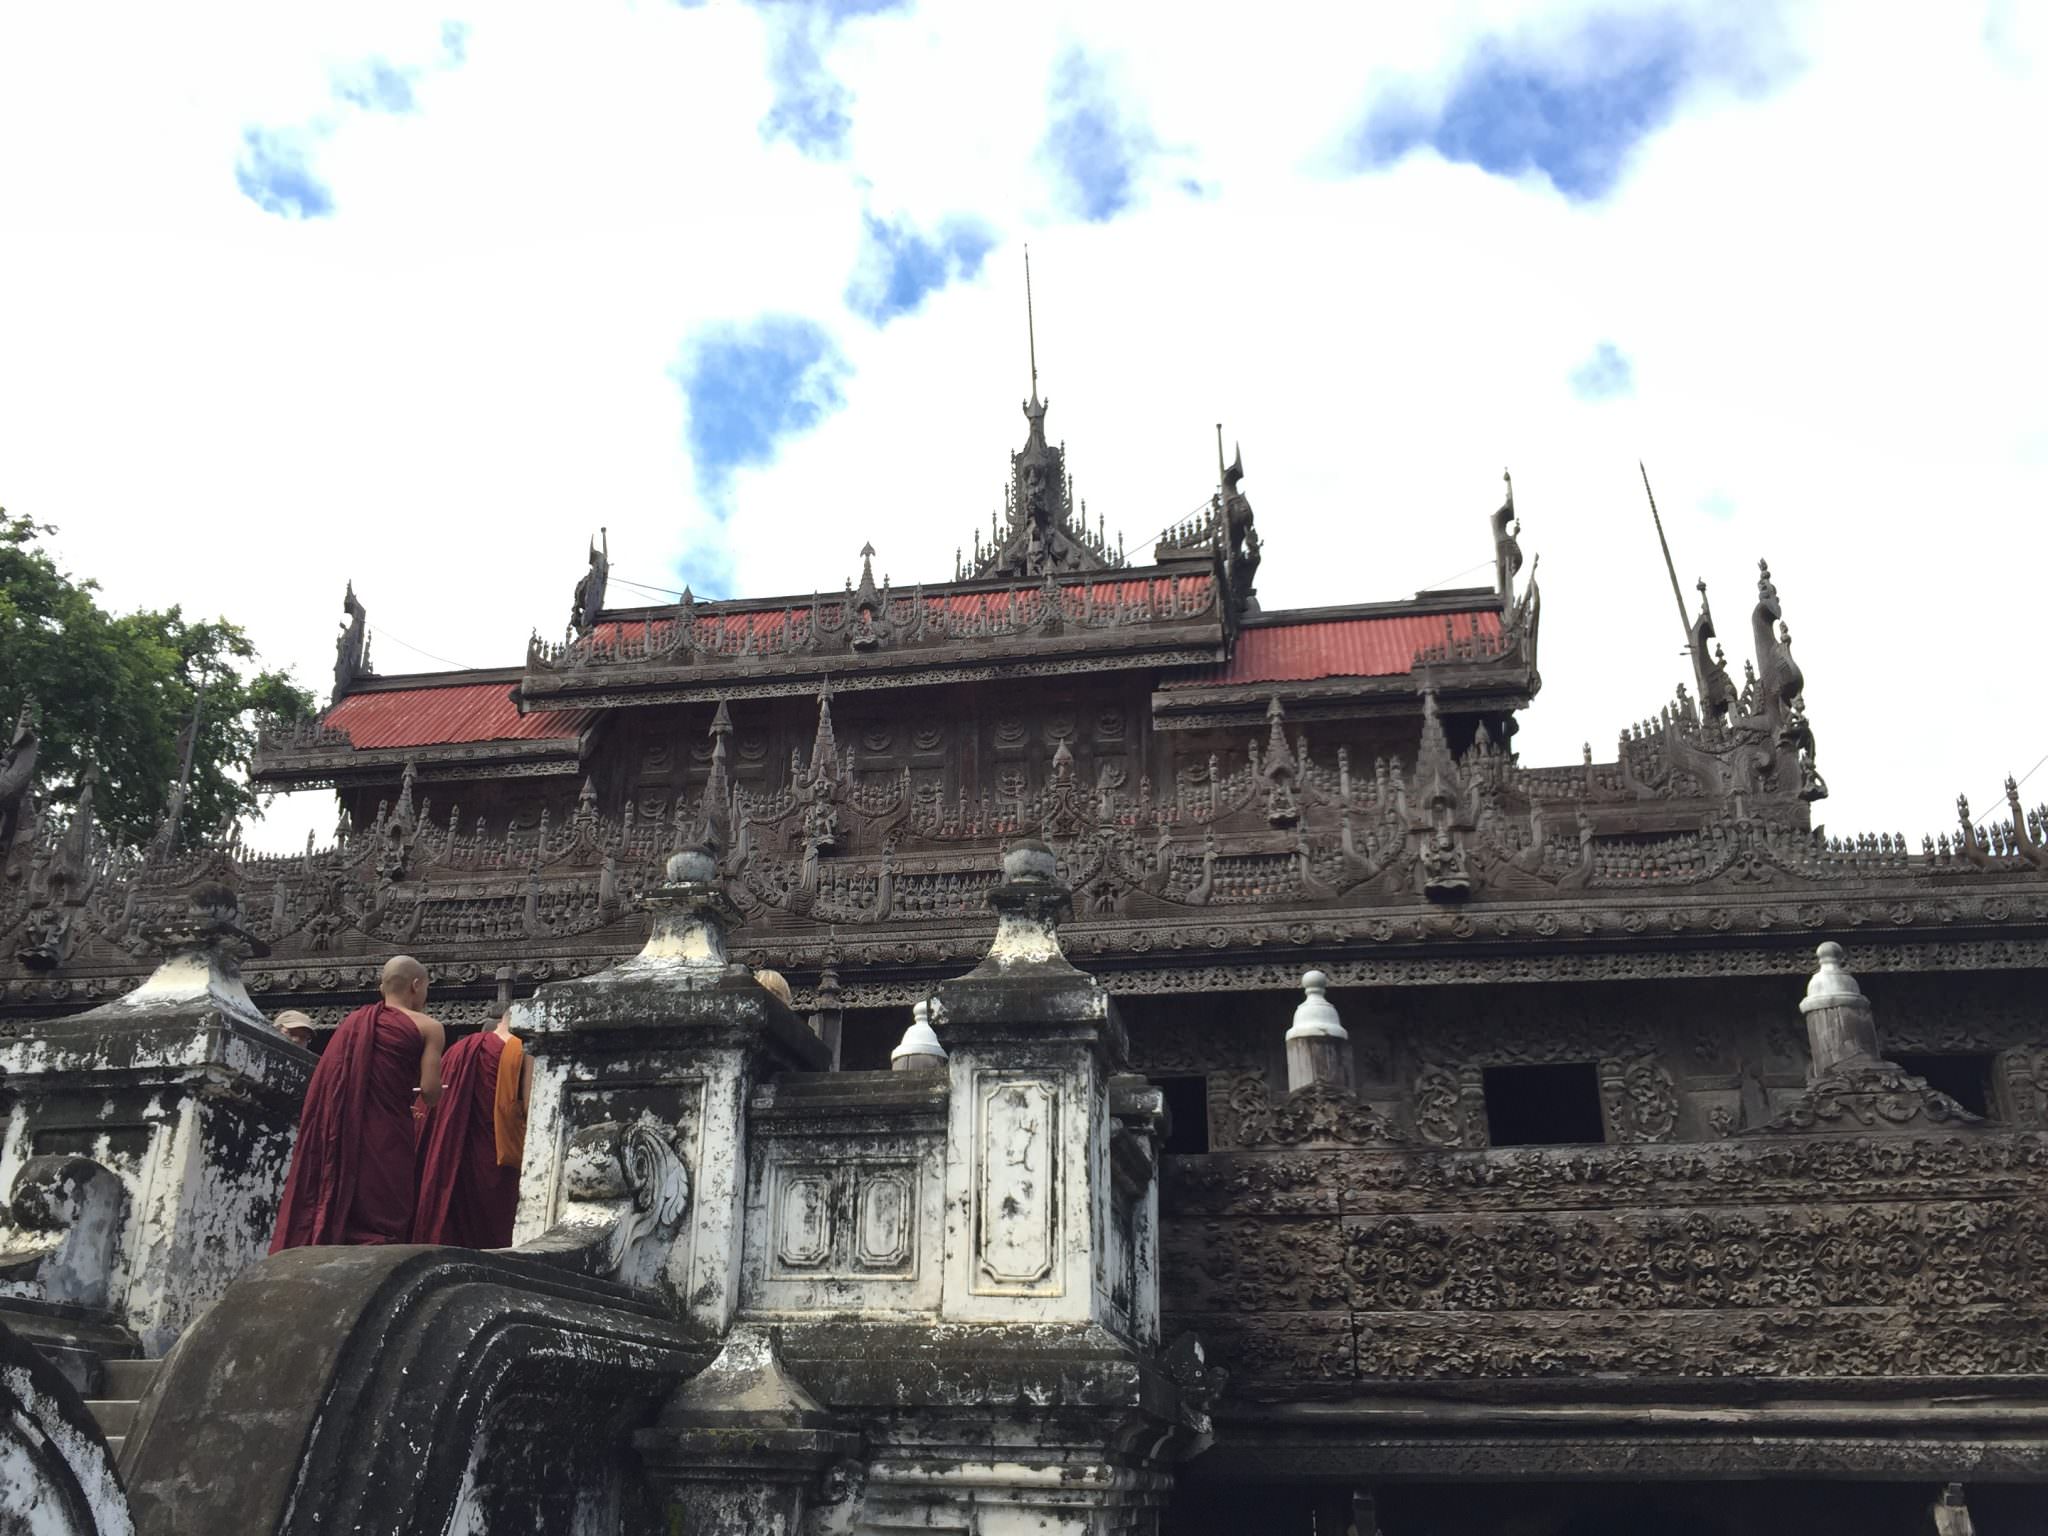 Moments after I took this photo, the monks spun around to put the Palace at their backs and took a selfie with their iPhones. I wish I would've caught that on film, as it were. © 2015 Gail Jessen